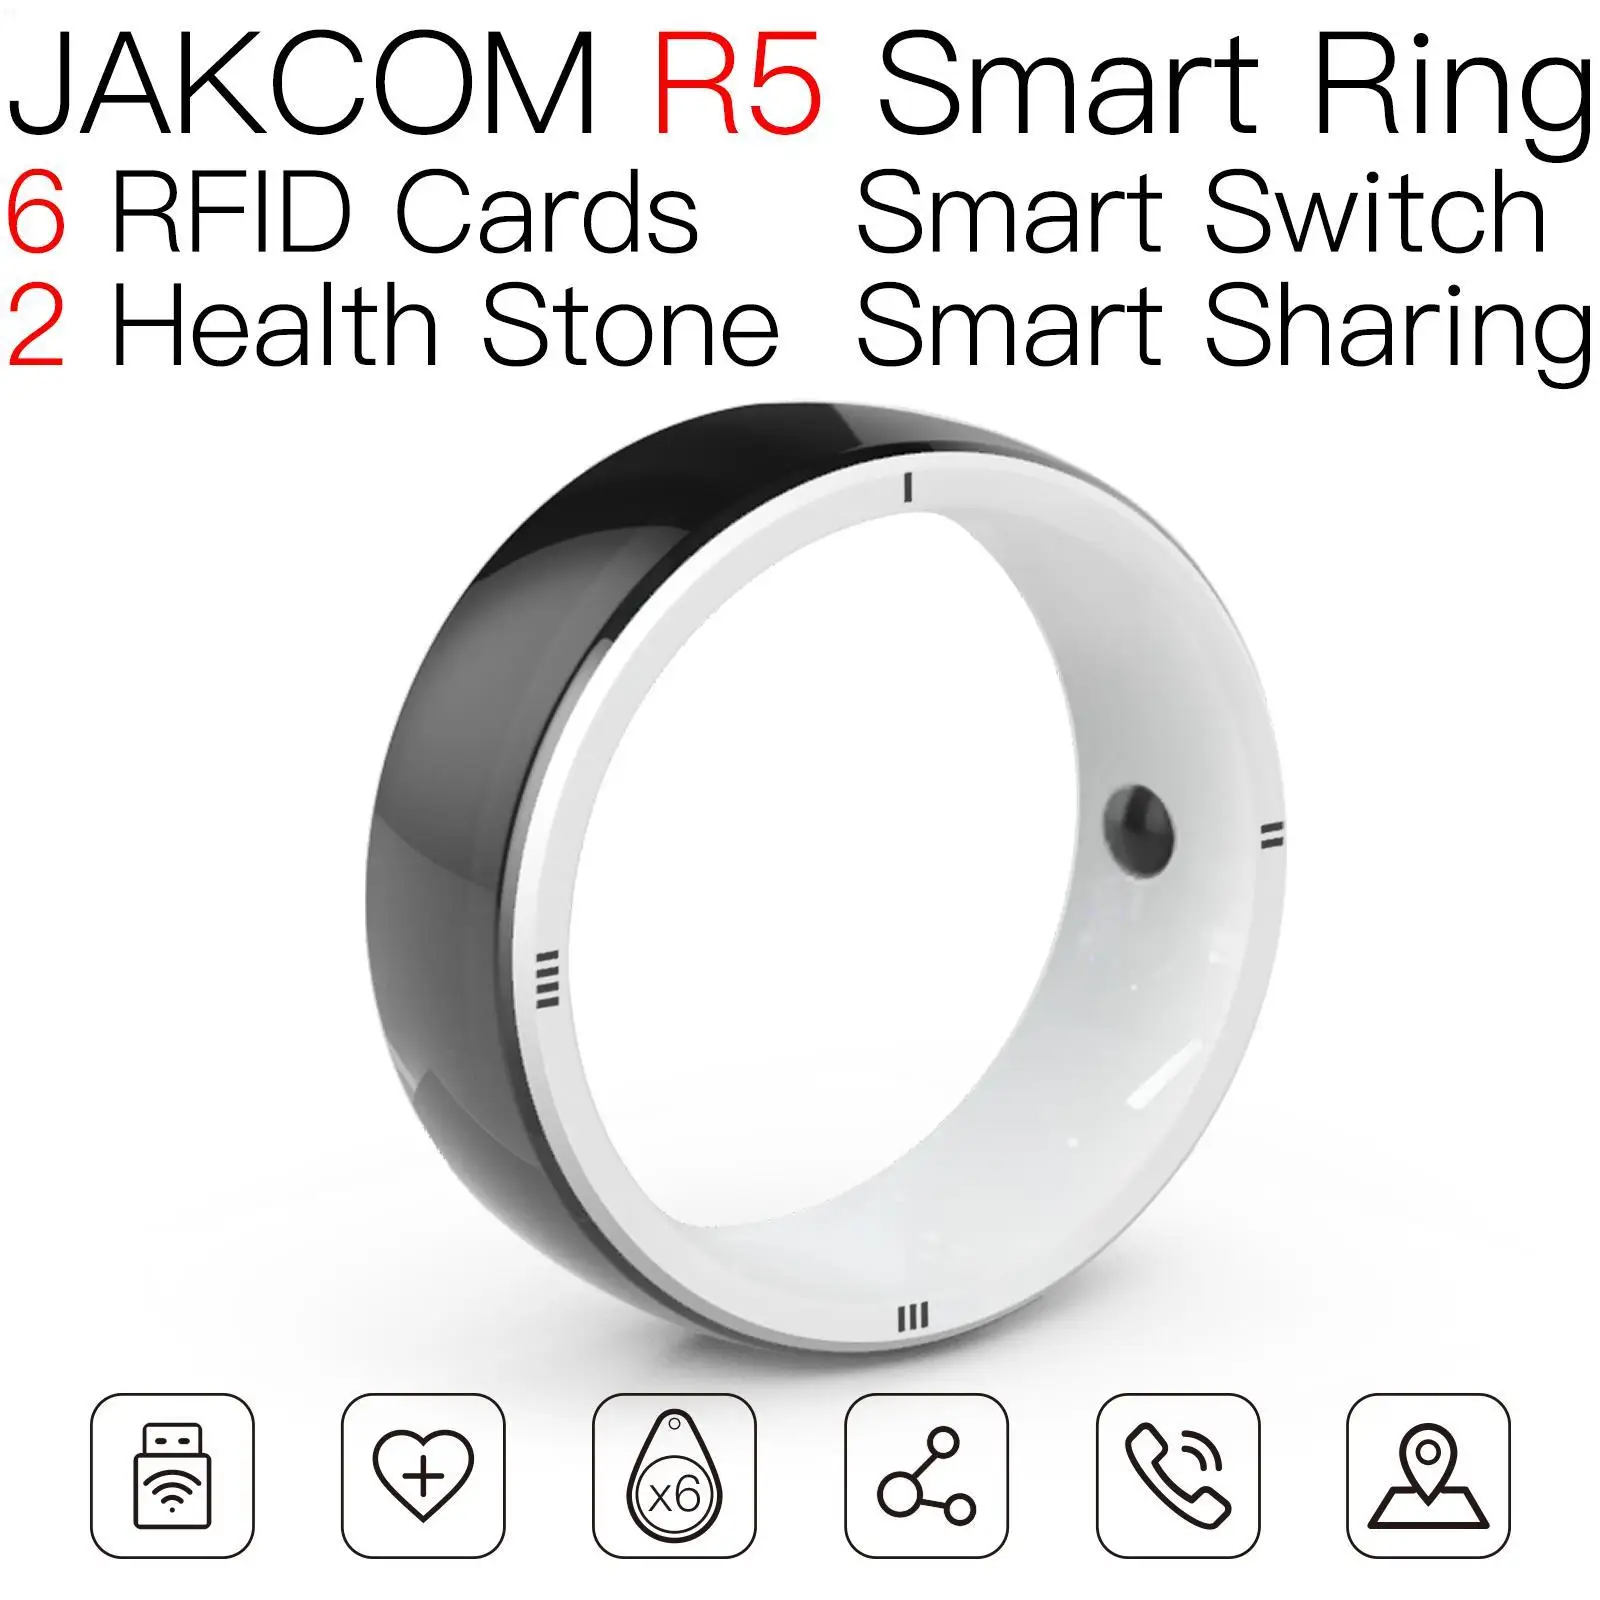 

JAKCOM R5 Smart Ring Newer than nfc a smart wtach s50 uid 100 rfid frequency jammer ms rao key tag roger protection card date